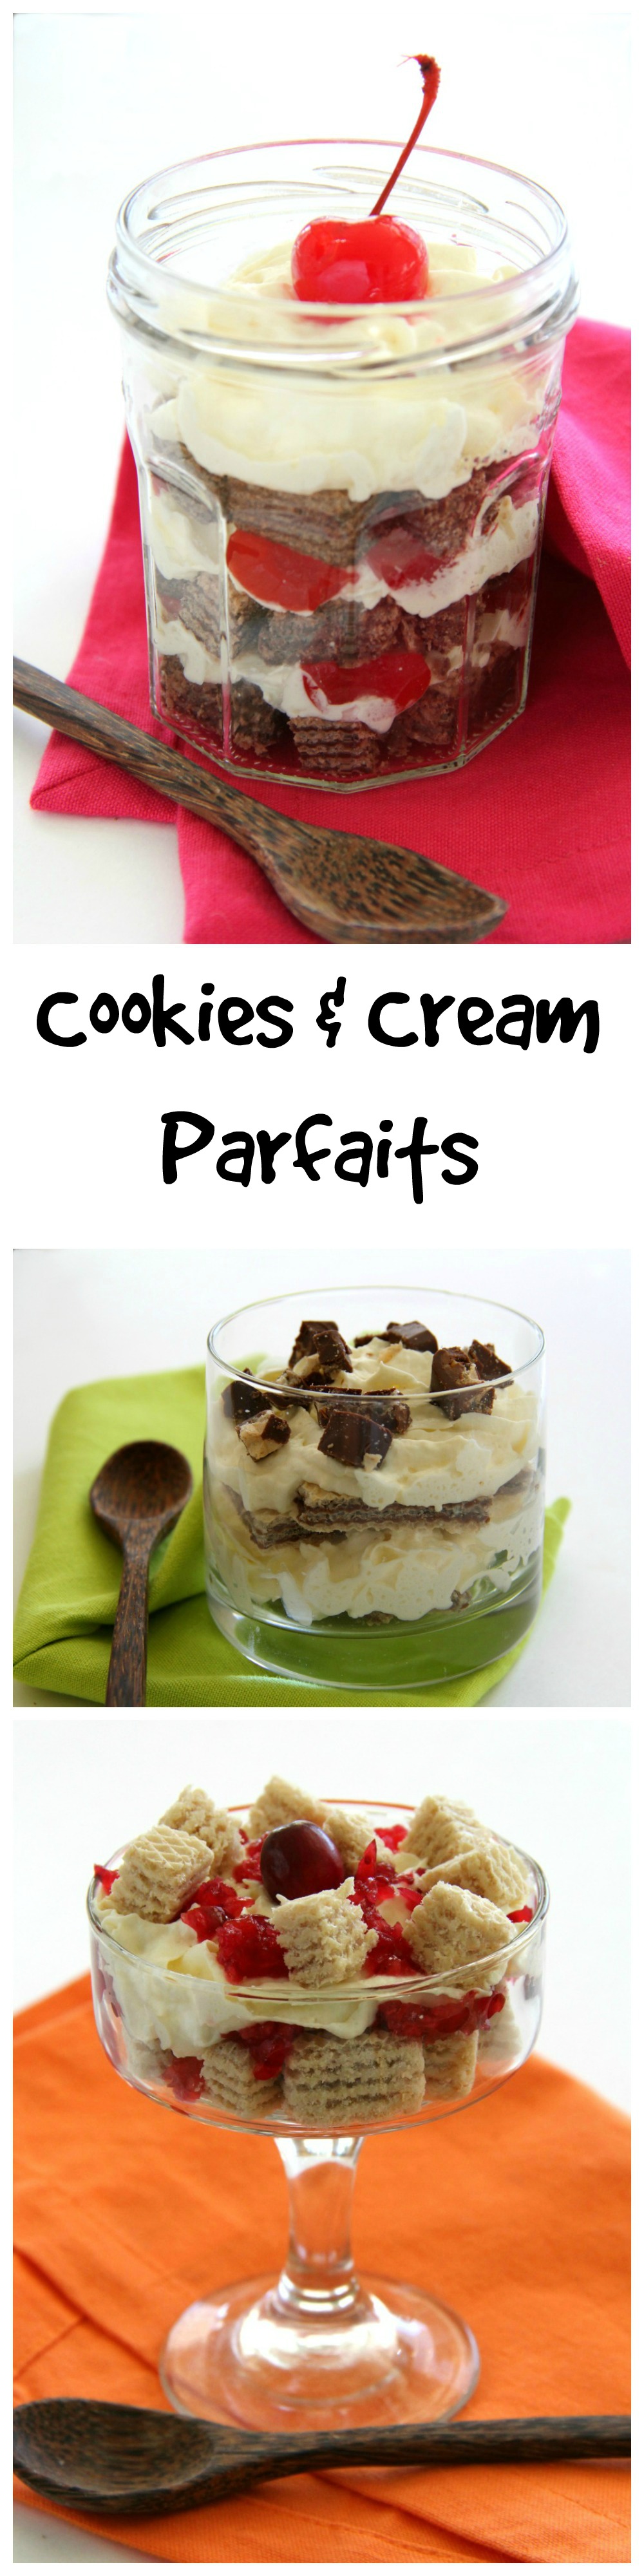 Cookies and Cream Parfaits: Flavored wafer cookies layered with homemade whipped cream and perhaps some fruit make a light, airy, perfectly elegant yet simple dessert on ShockinglyDelicious.com. #Loacker #parfait #dessert